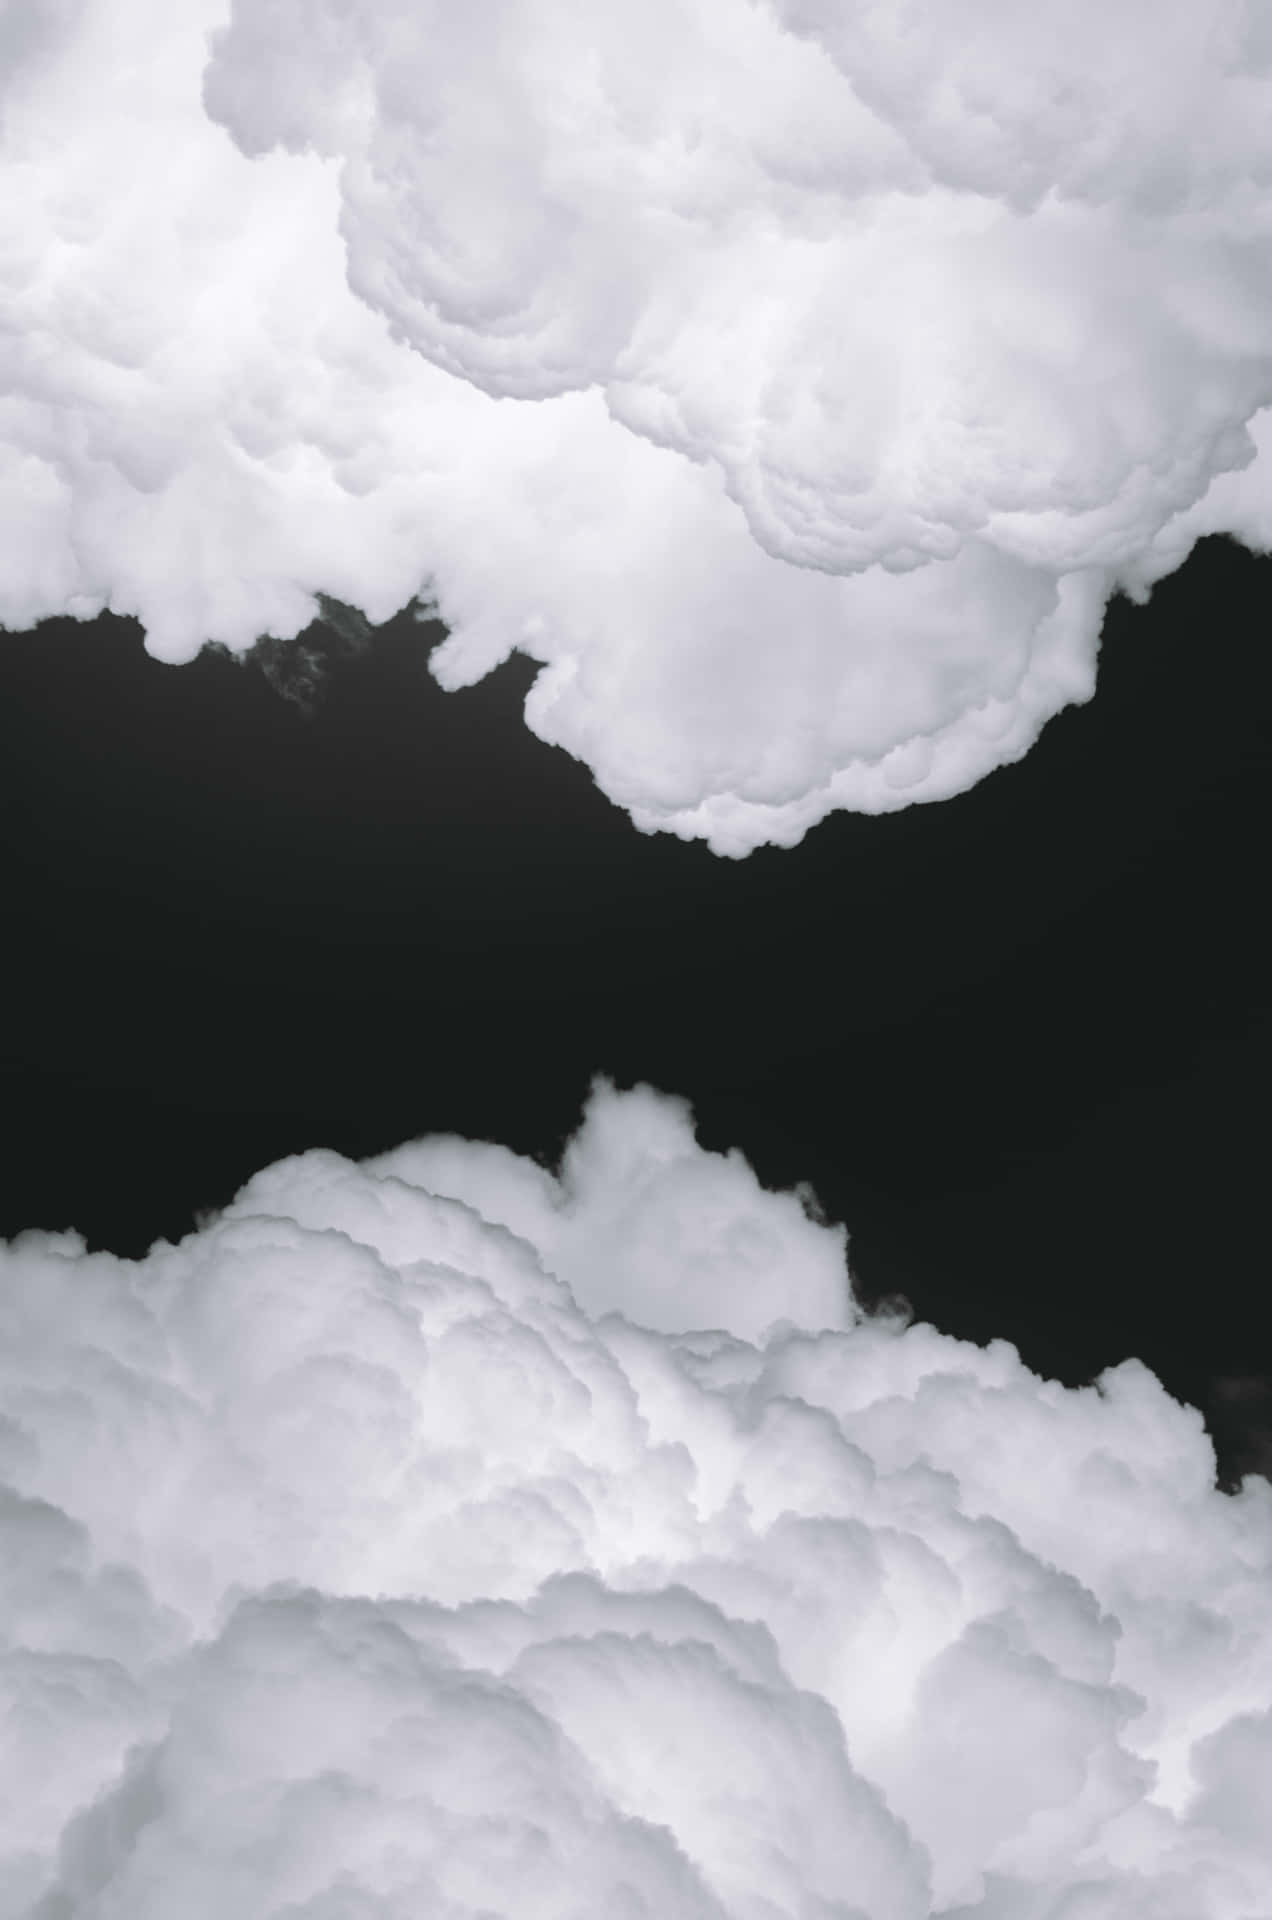 Black Clouds Forming A Silhouette Wallpaper